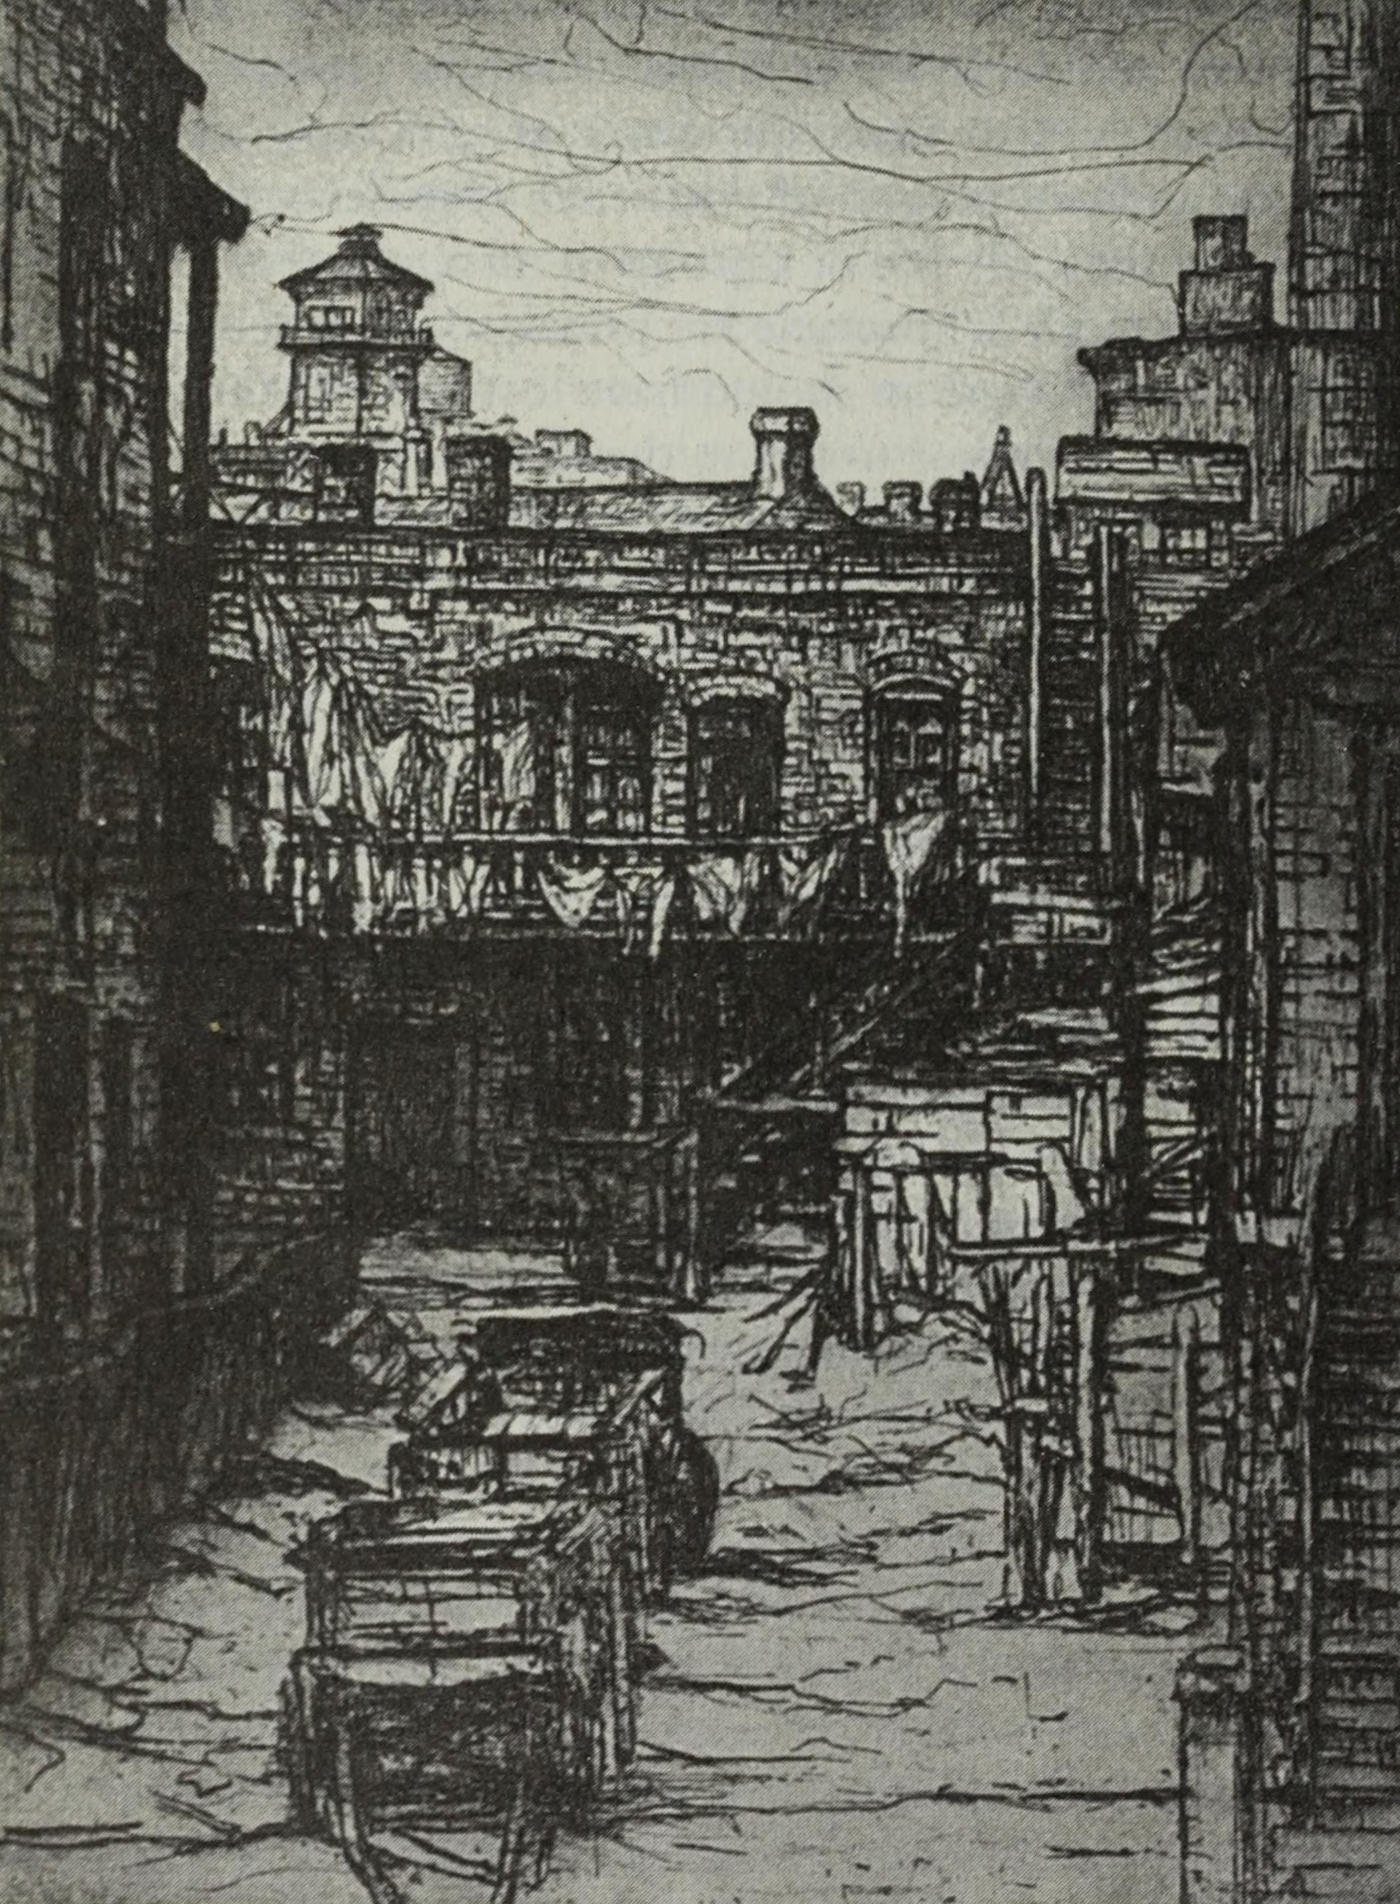 An illustration of a courtyard in a poor building, with carts in the foreground and laundry lines in the background.